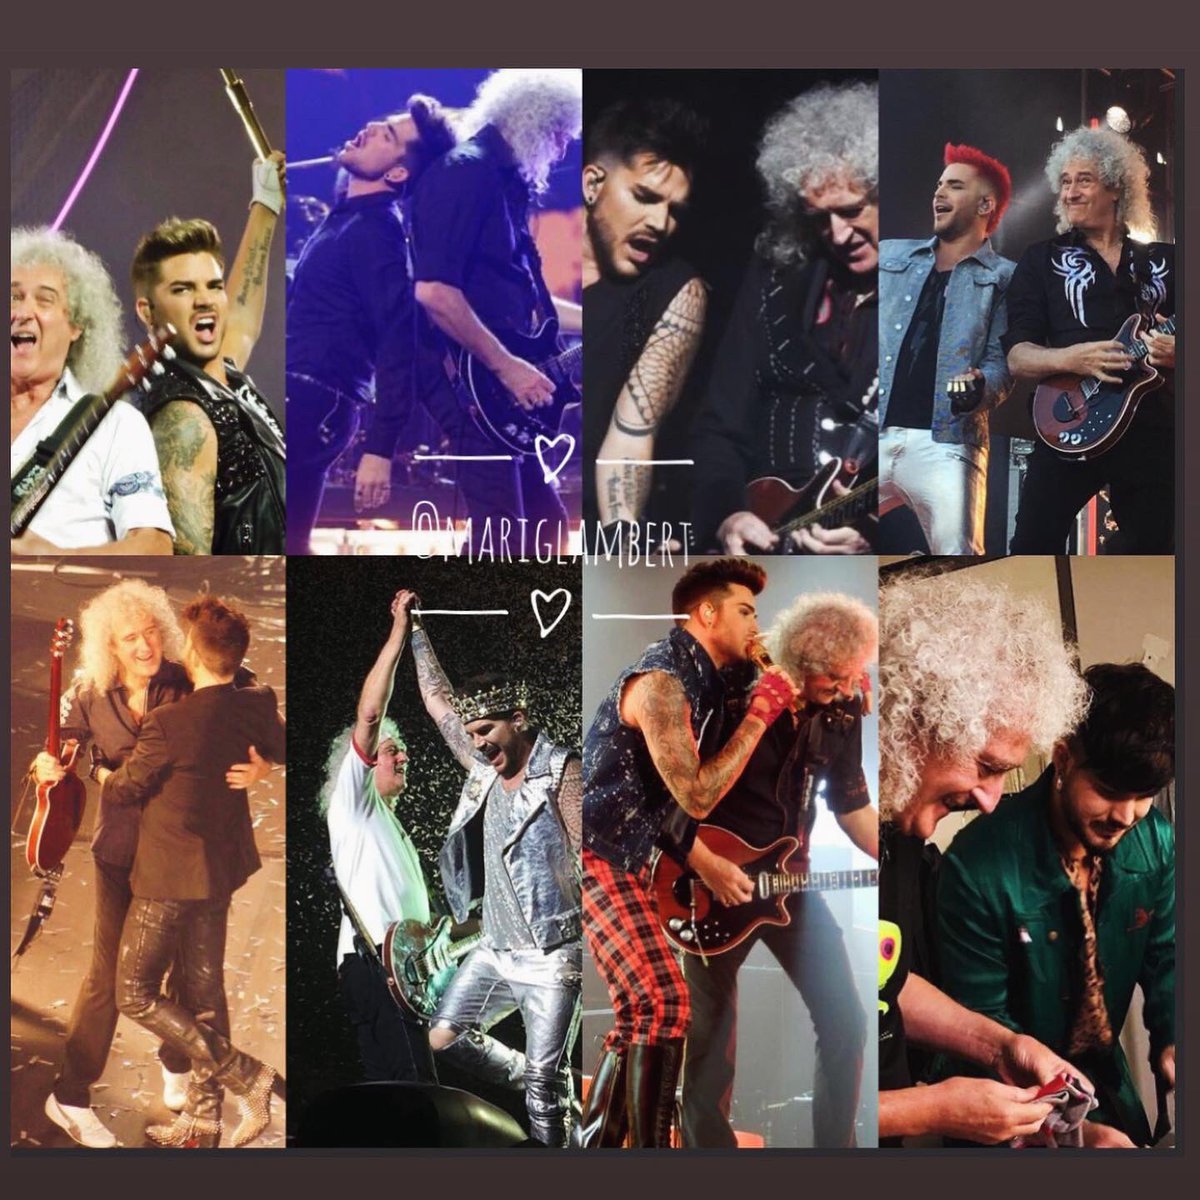 Friendship💫✨🌺
📸credit to owners(MyEdit)
@adamlambert 
@DrBrianMay